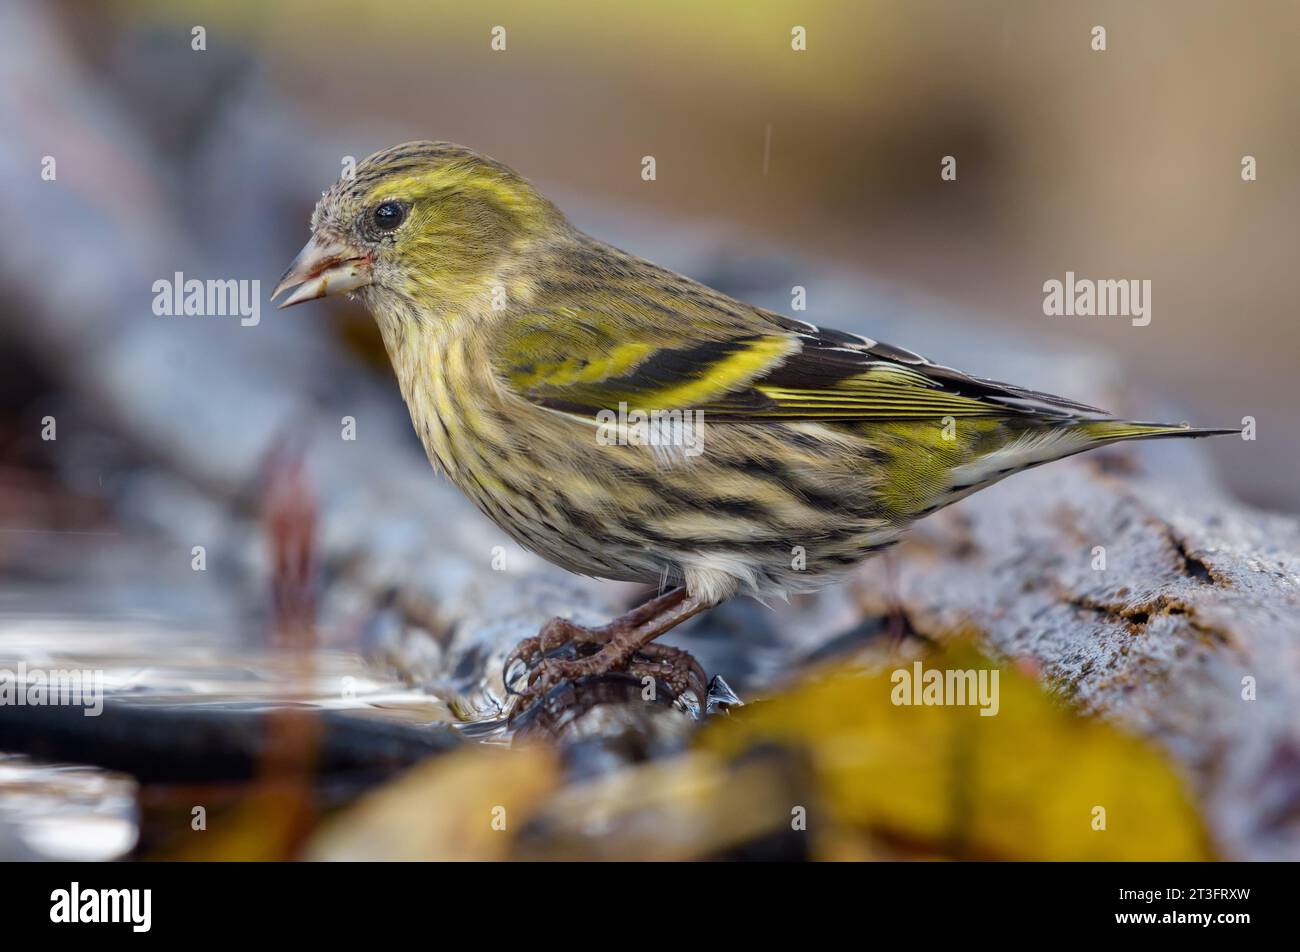 Adult female Eurasian Siskin (Spinus spinus) looking curiously sitting on twigs in wet damp place near water pond Stock Photo